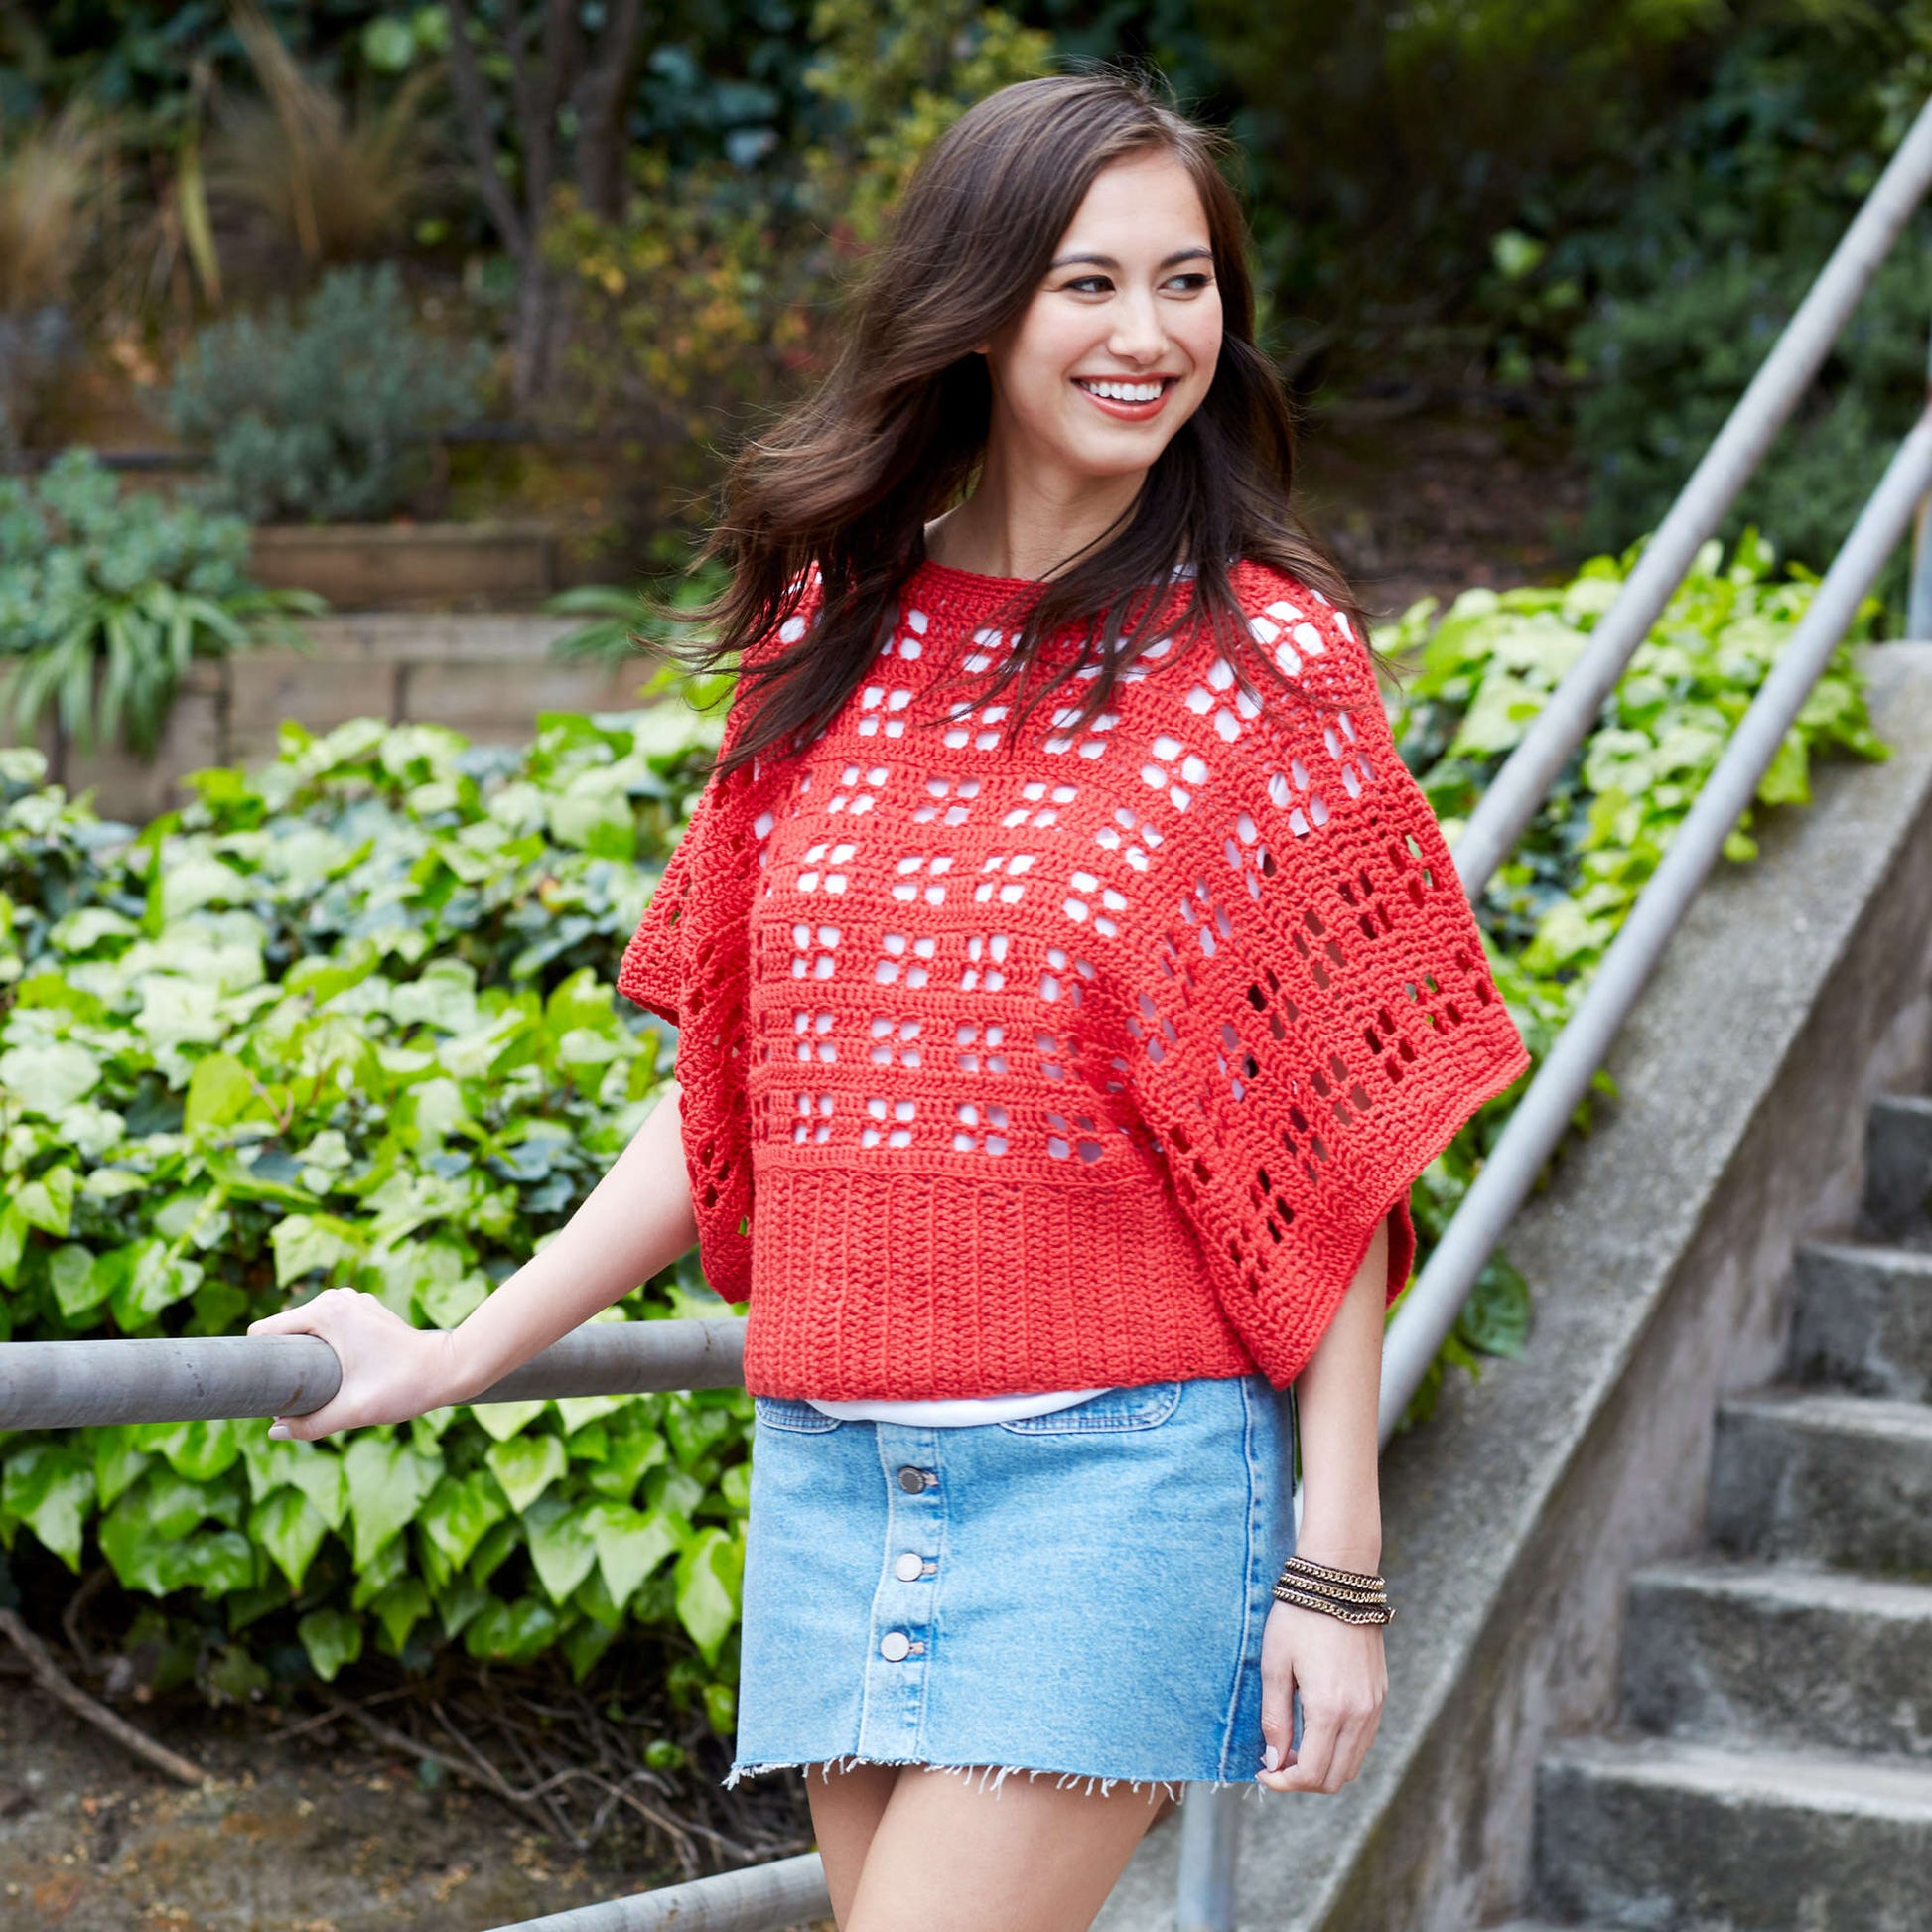 Free Red Heart Crochet Clementine Chic Sweater Pattern